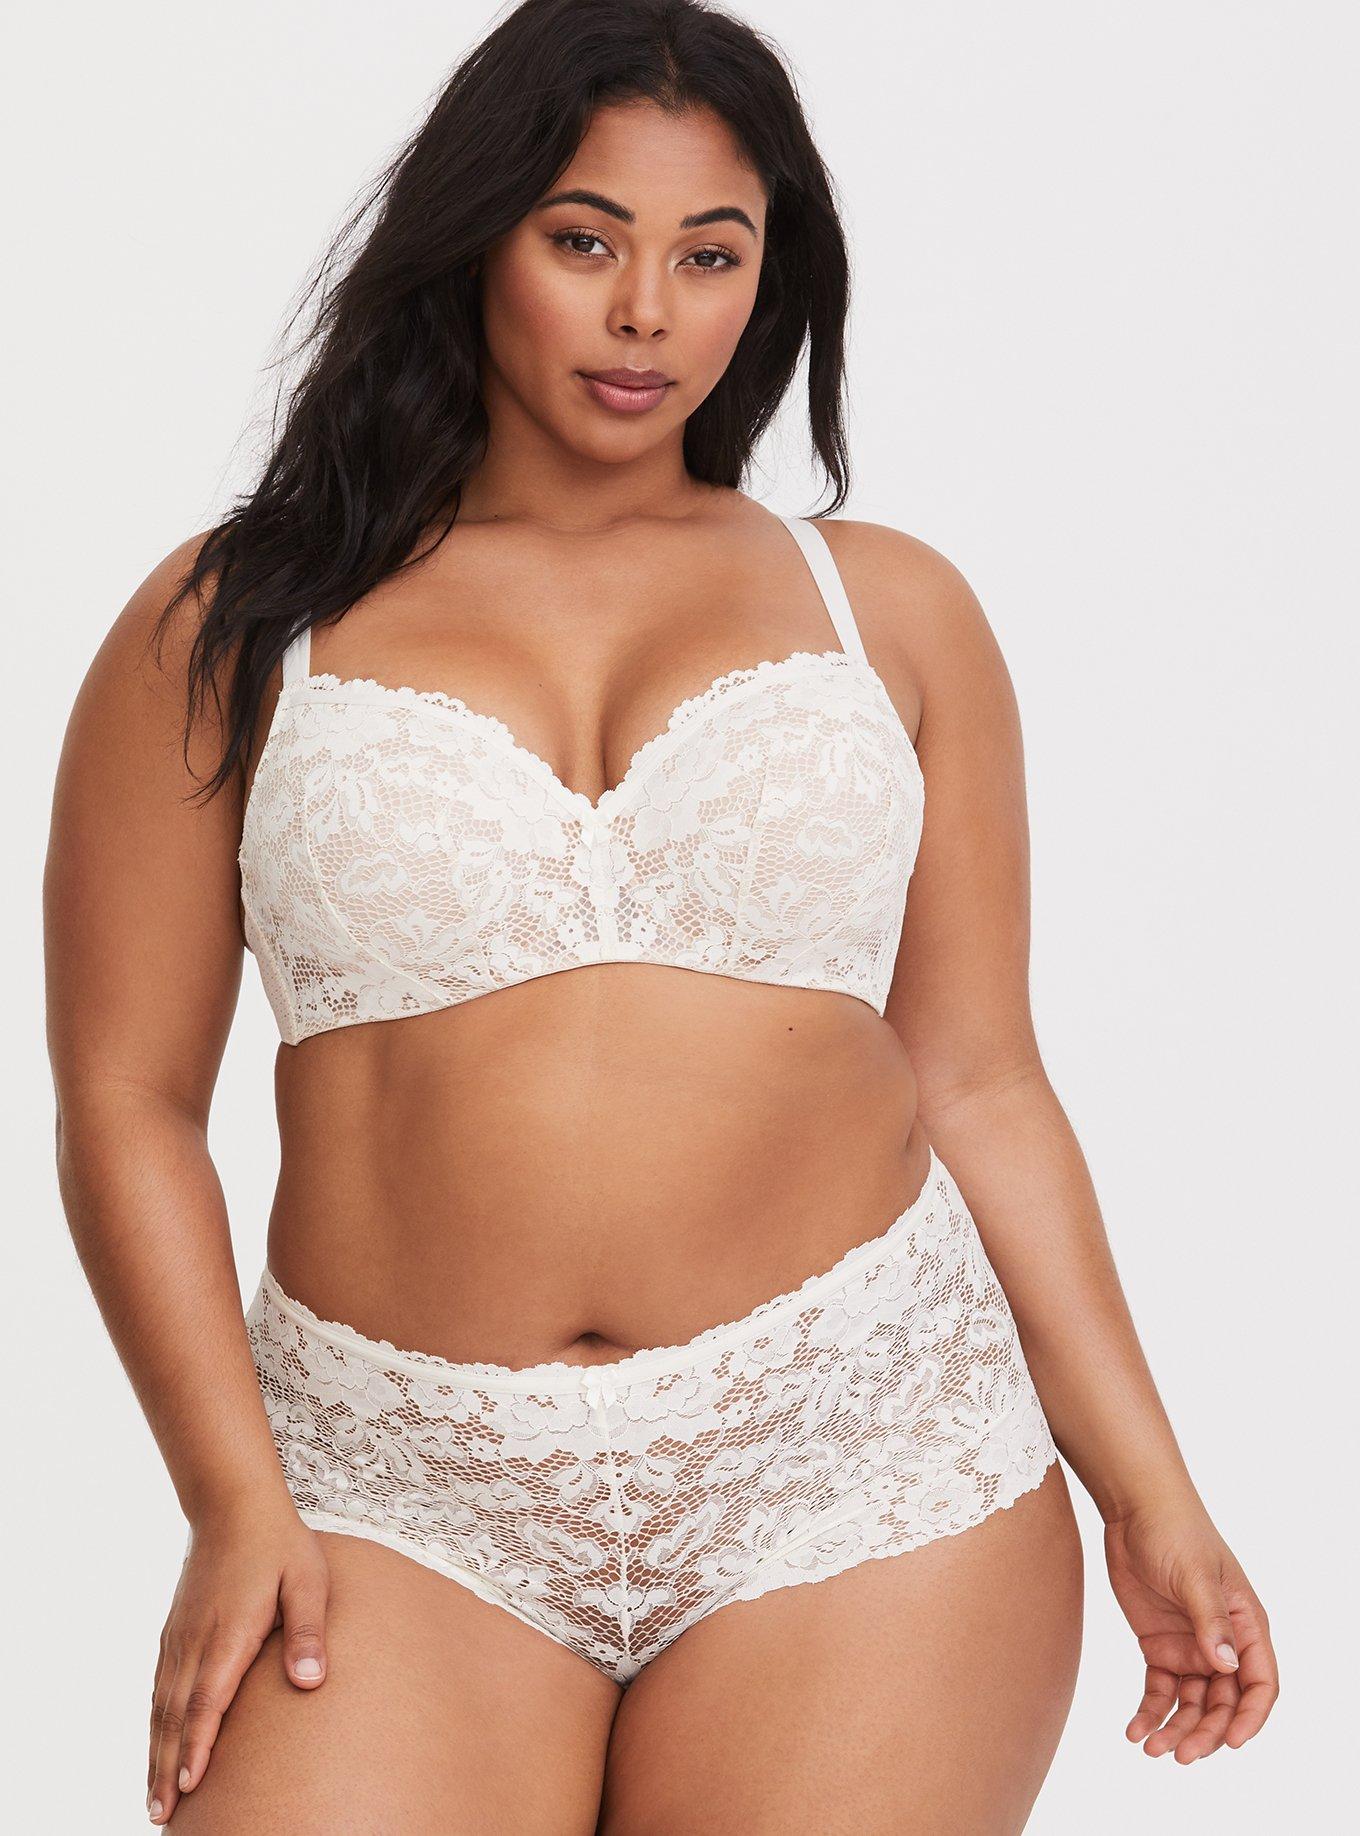  Womens Sexy Lace Bra Underwire Balconette Unlined Demi Sheer  Plus Size Ivory 36B